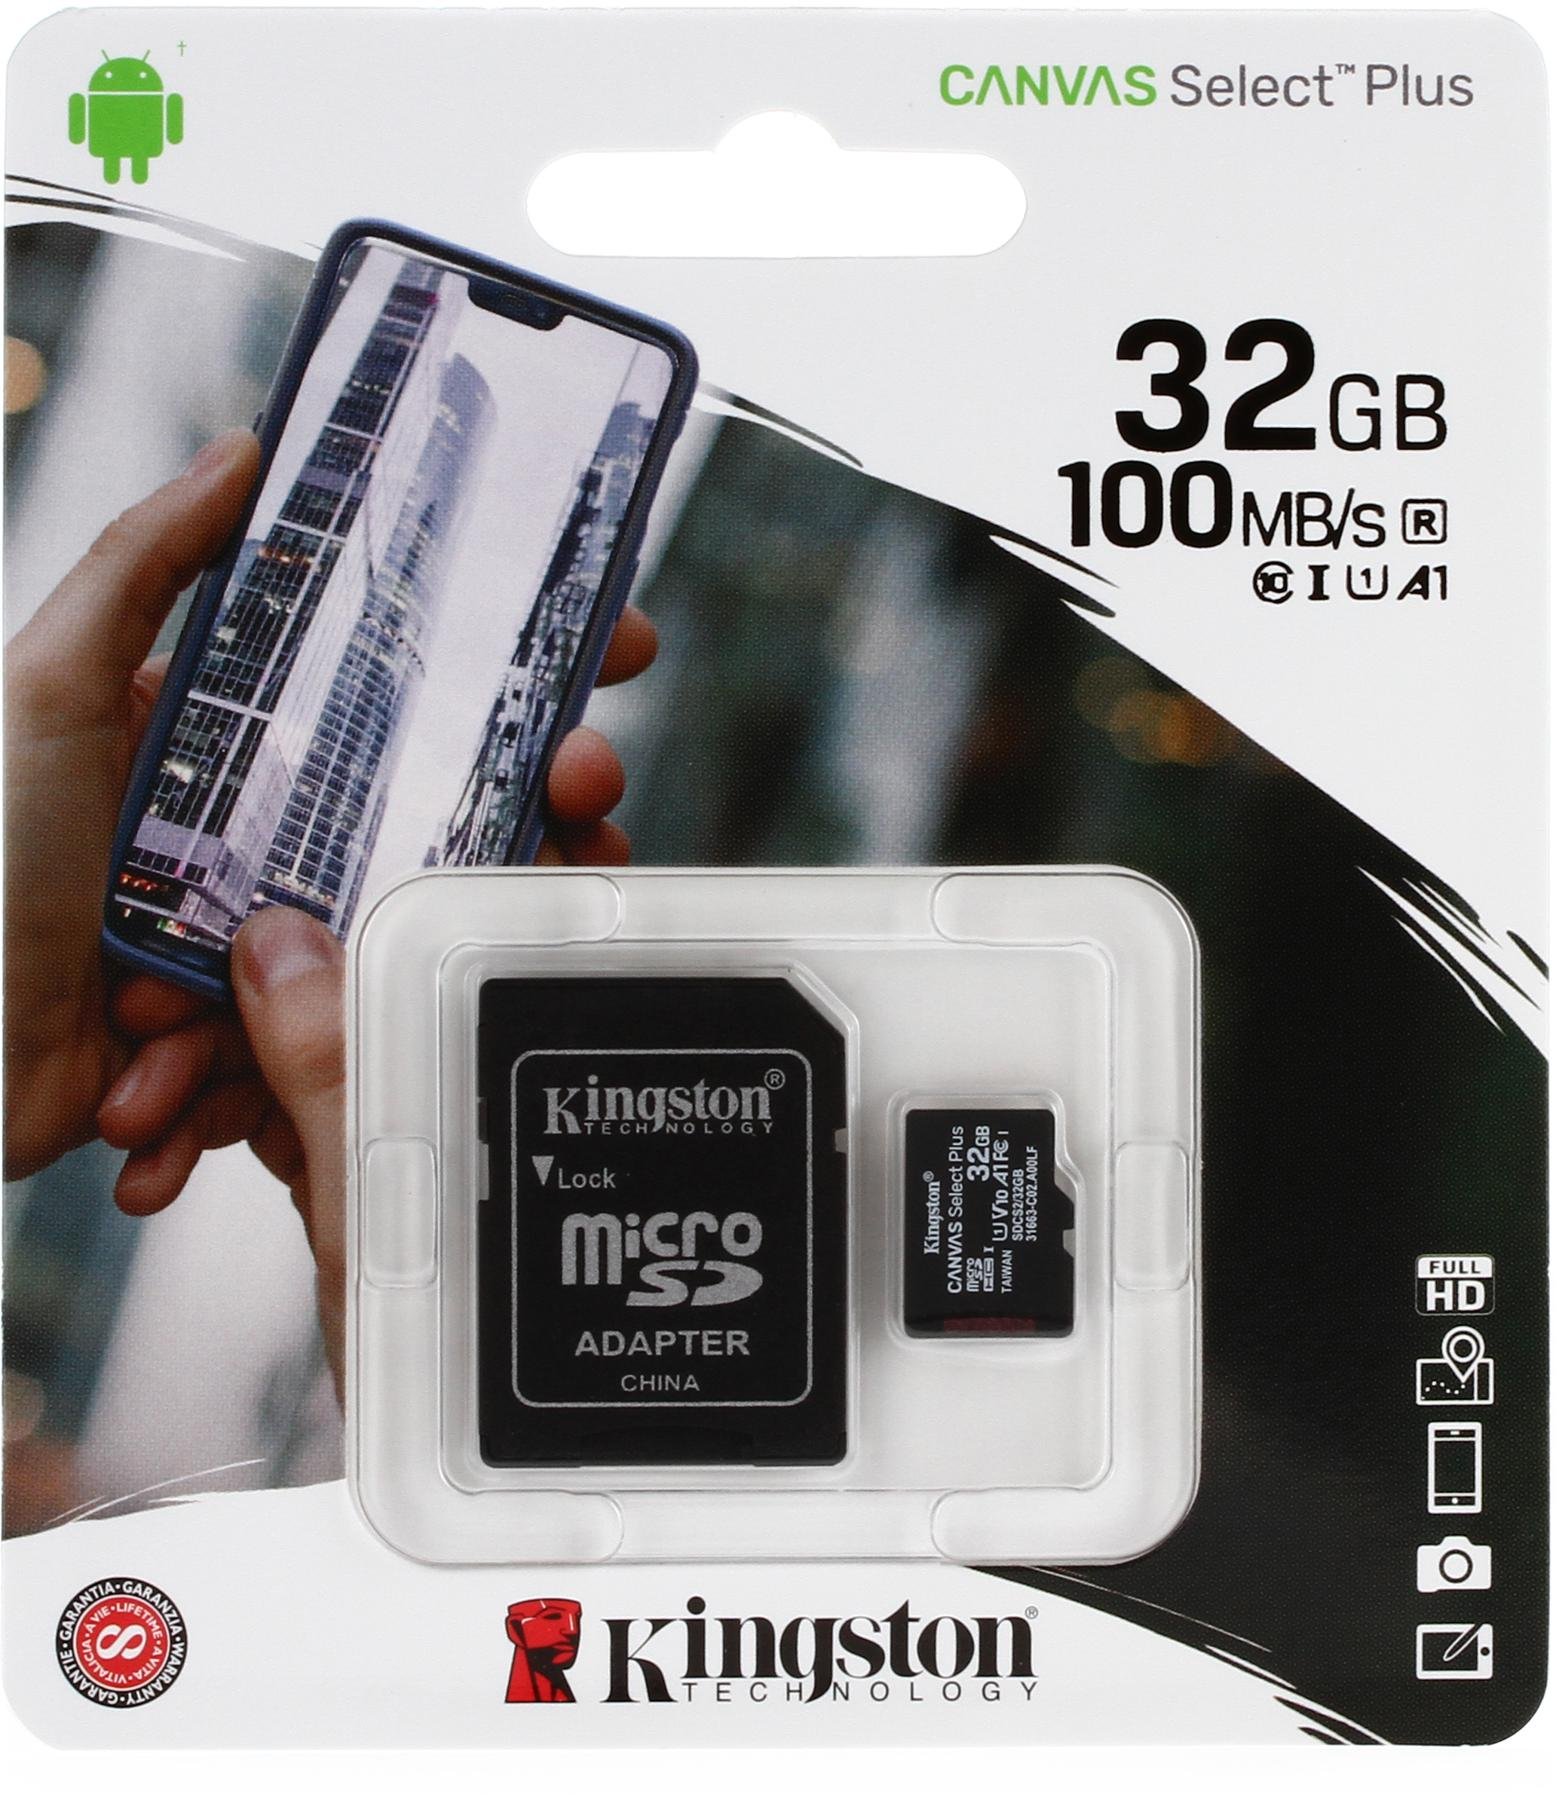 Kingston 32GB Samsung I9500 MicroSDHC Canvas Select Plus Card Verified by SanFlash. 100MBs Works with Kingston 